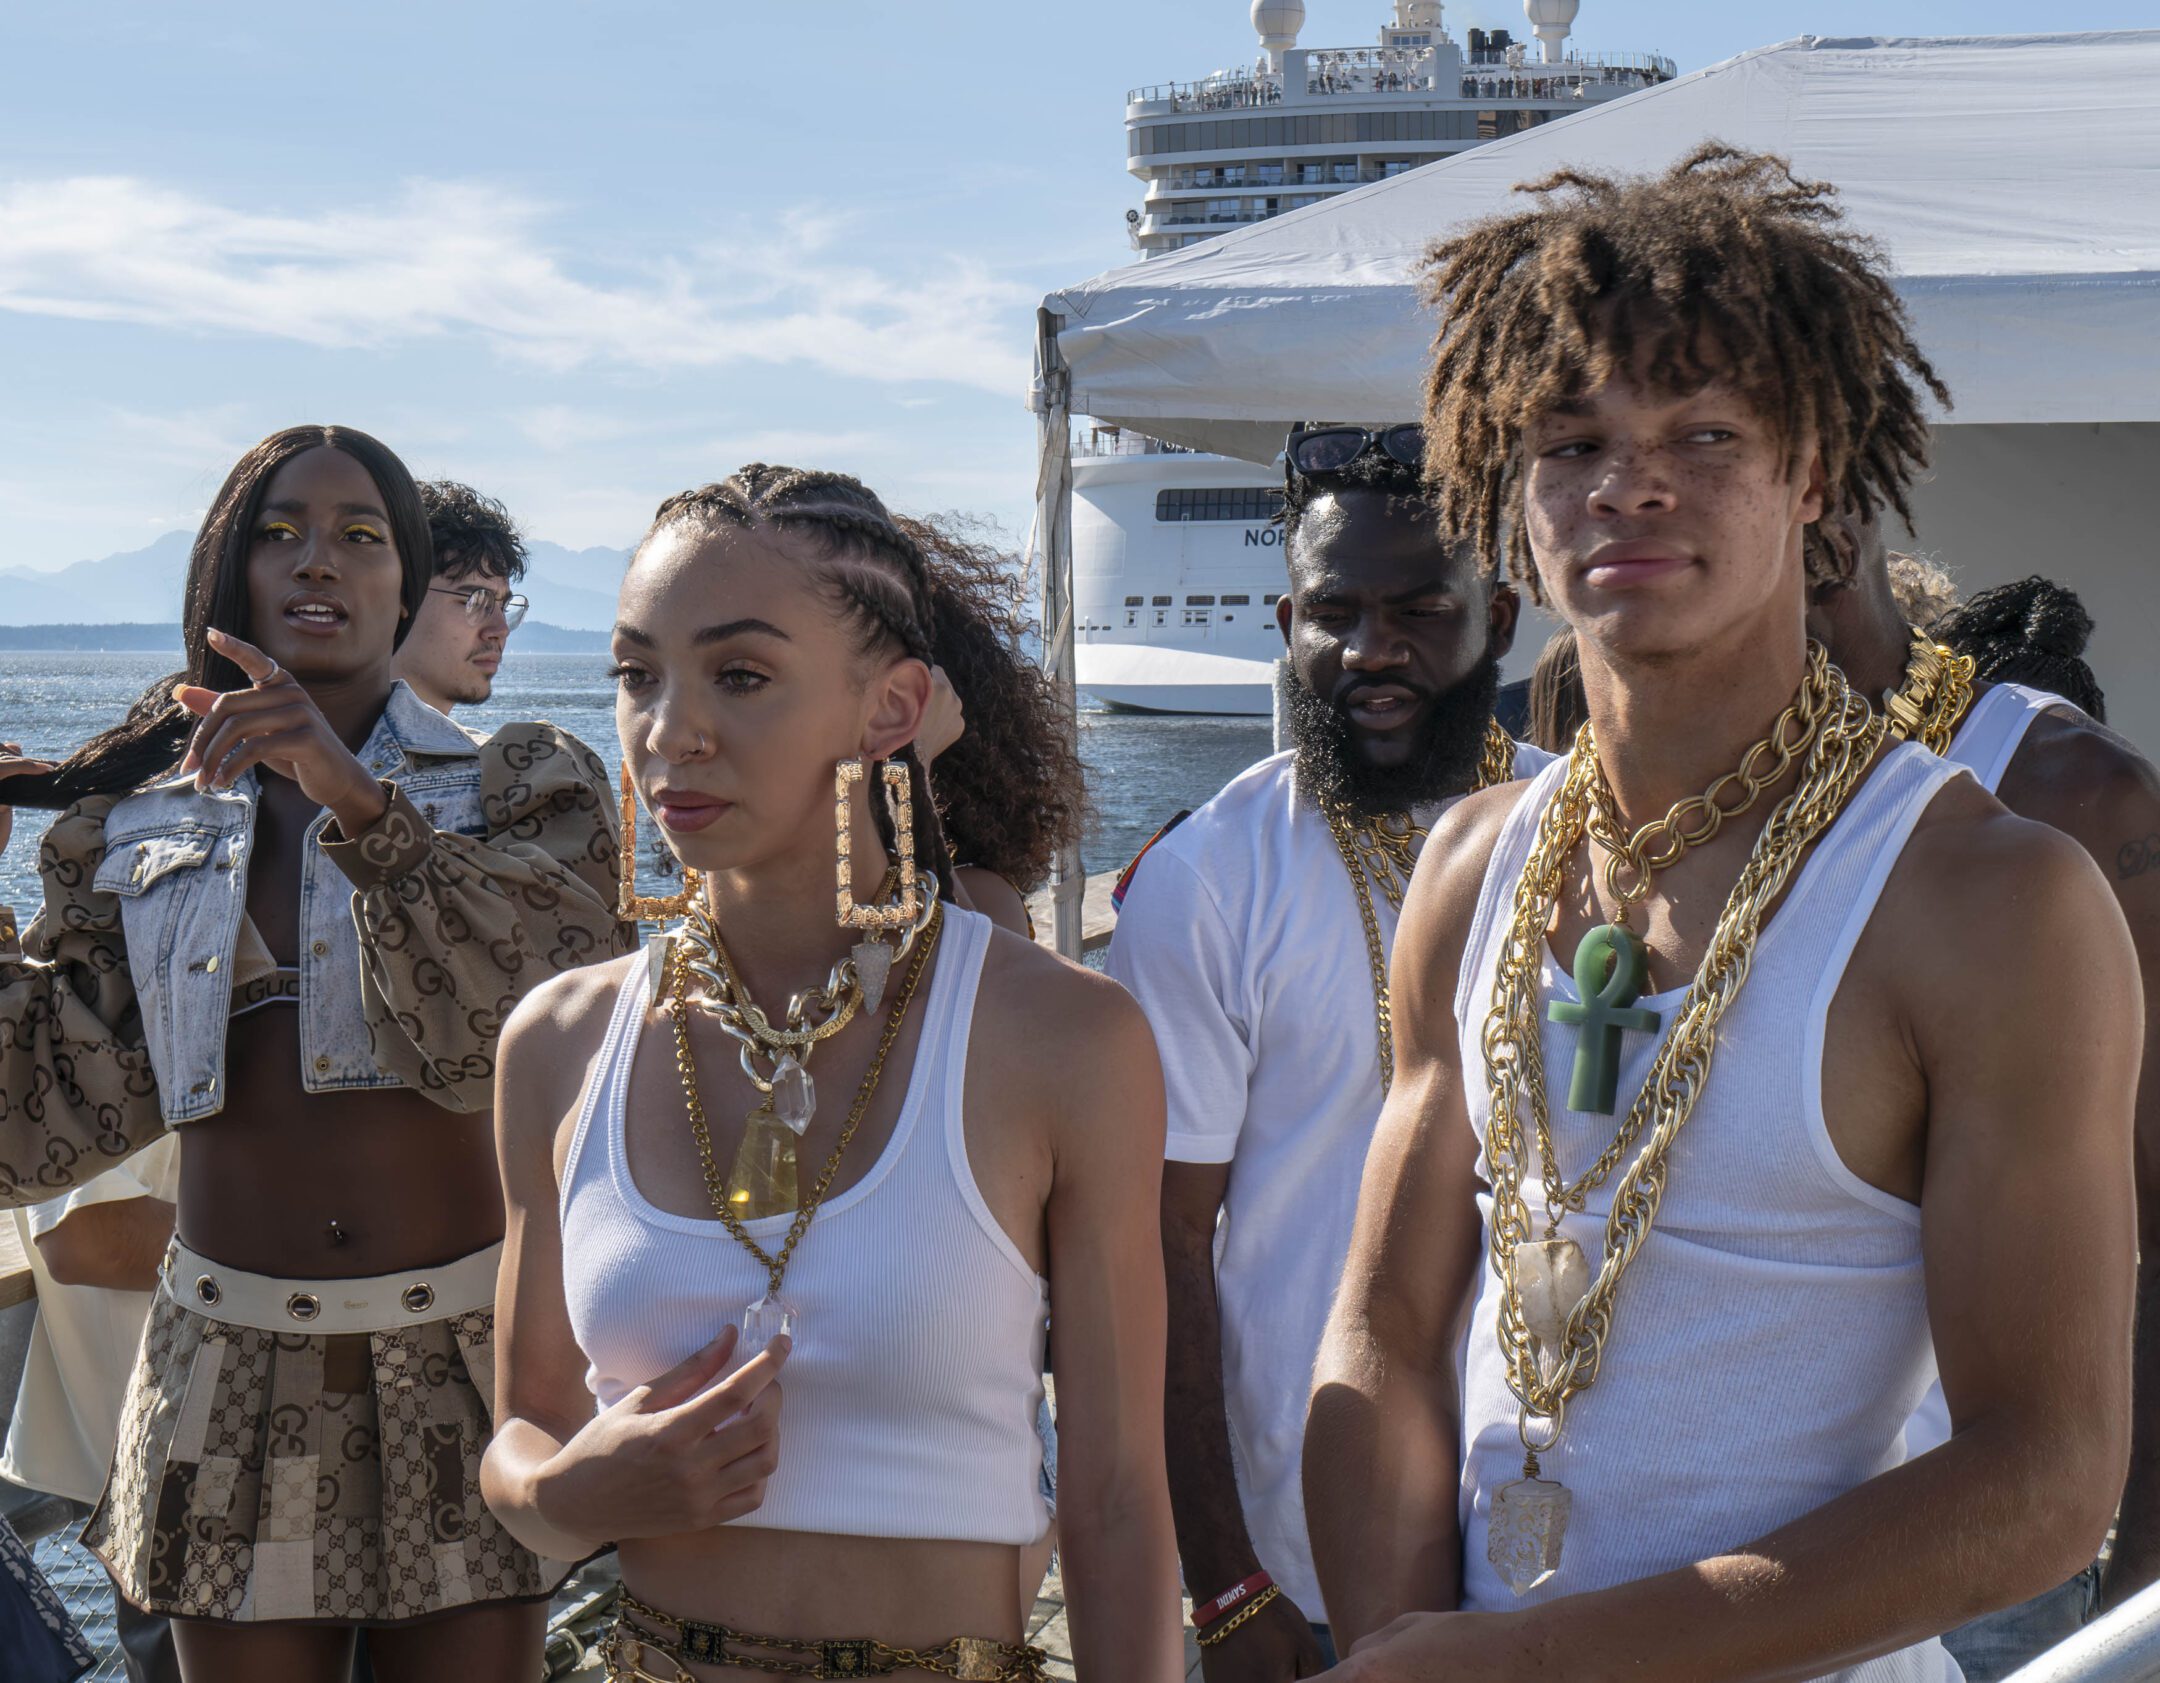 4 Black models wearing different outfits and an assortment of jewelry and gold accessories. They are outdoors at Pier 62. In the background, there is a cruise ship and the blue summer sky.